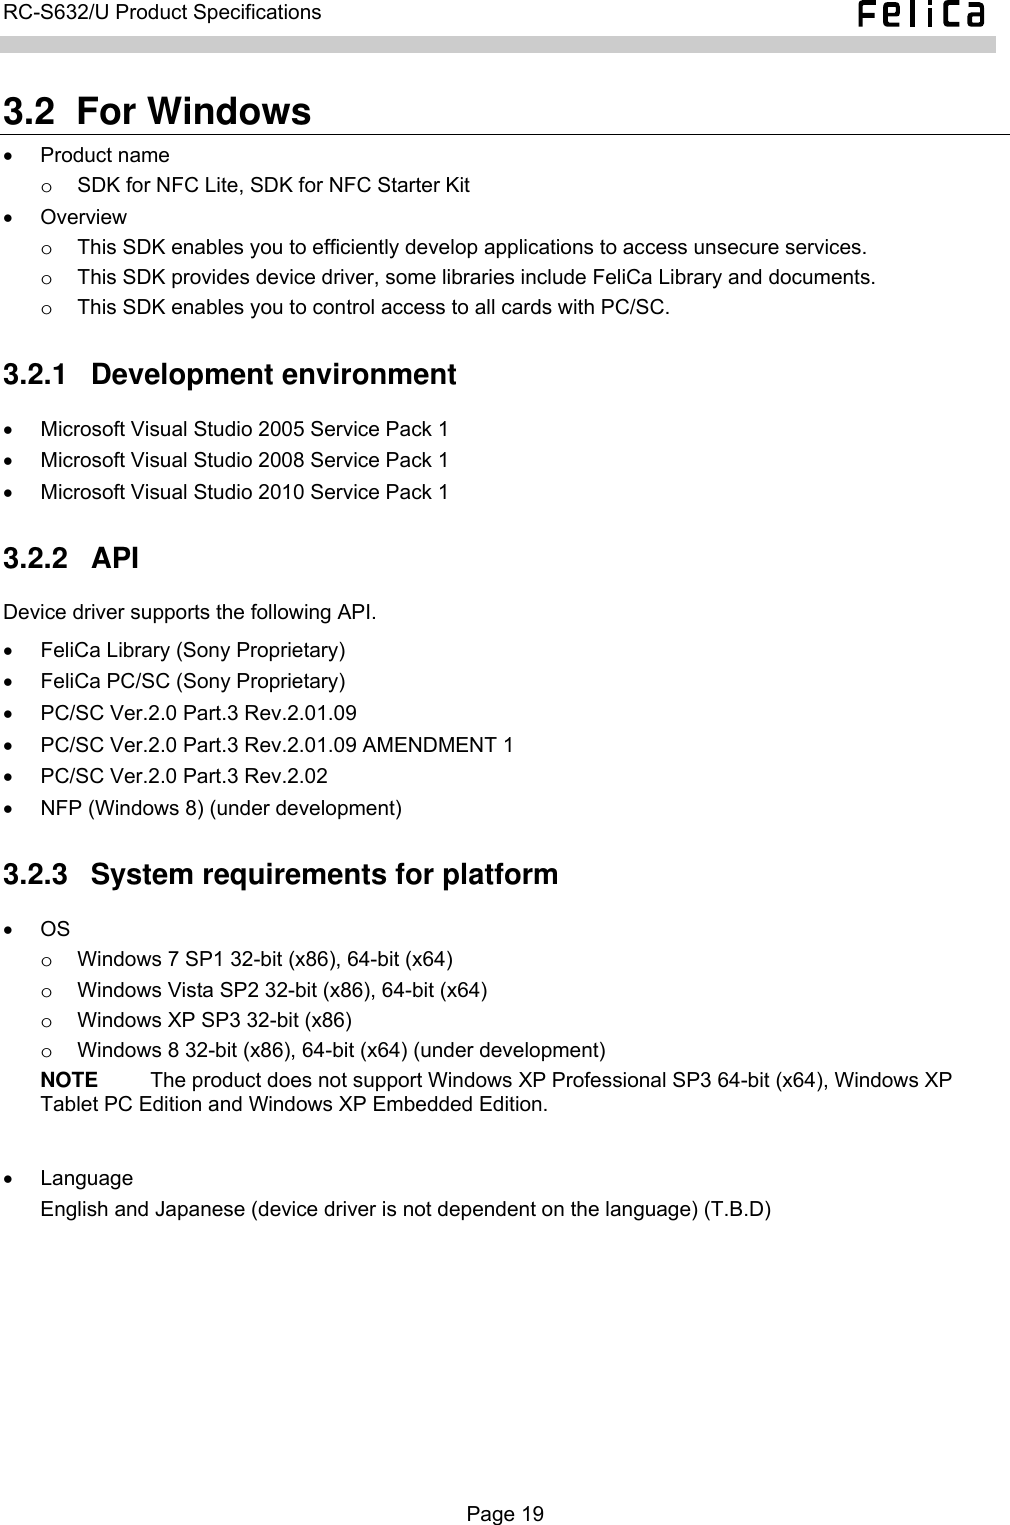   RC-S632/U Product Specifications  3.2  For Windows • Product name o  SDK for NFC Lite, SDK for NFC Starter Kit • Overview  o  This SDK enables you to efficiently develop applications to access unsecure services. o  This SDK provides device driver, some libraries include FeliCa Library and documents. o  This SDK enables you to control access to all cards with PC/SC. 3.2.1  Development environment •  Microsoft Visual Studio 2005 Service Pack 1 •  Microsoft Visual Studio 2008 Service Pack 1 •  Microsoft Visual Studio 2010 Service Pack 1 3.2.2  API Device driver supports the following API. •  FeliCa Library (Sony Proprietary) •  FeliCa PC/SC (Sony Proprietary) •  PC/SC Ver.2.0 Part.3 Rev.2.01.09 •  PC/SC Ver.2.0 Part.3 Rev.2.01.09 AMENDMENT 1 •  PC/SC Ver.2.0 Part.3 Rev.2.02 •  NFP (Windows 8) (under development) 3.2.3  System requirements for platform • OS  o  Windows 7 SP1 32-bit (x86), 64-bit (x64) o  Windows Vista SP2 32-bit (x86), 64-bit (x64) o  Windows XP SP3 32-bit (x86) o  Windows 8 32-bit (x86), 64-bit (x64) (under development) NOTE     The product does not support Windows XP Professional SP3 64-bit (x64), Windows XP Tablet PC Edition and Windows XP Embedded Edition.  • Language English and Japanese (device driver is not dependent on the language) (T.B.D)  Page 19  